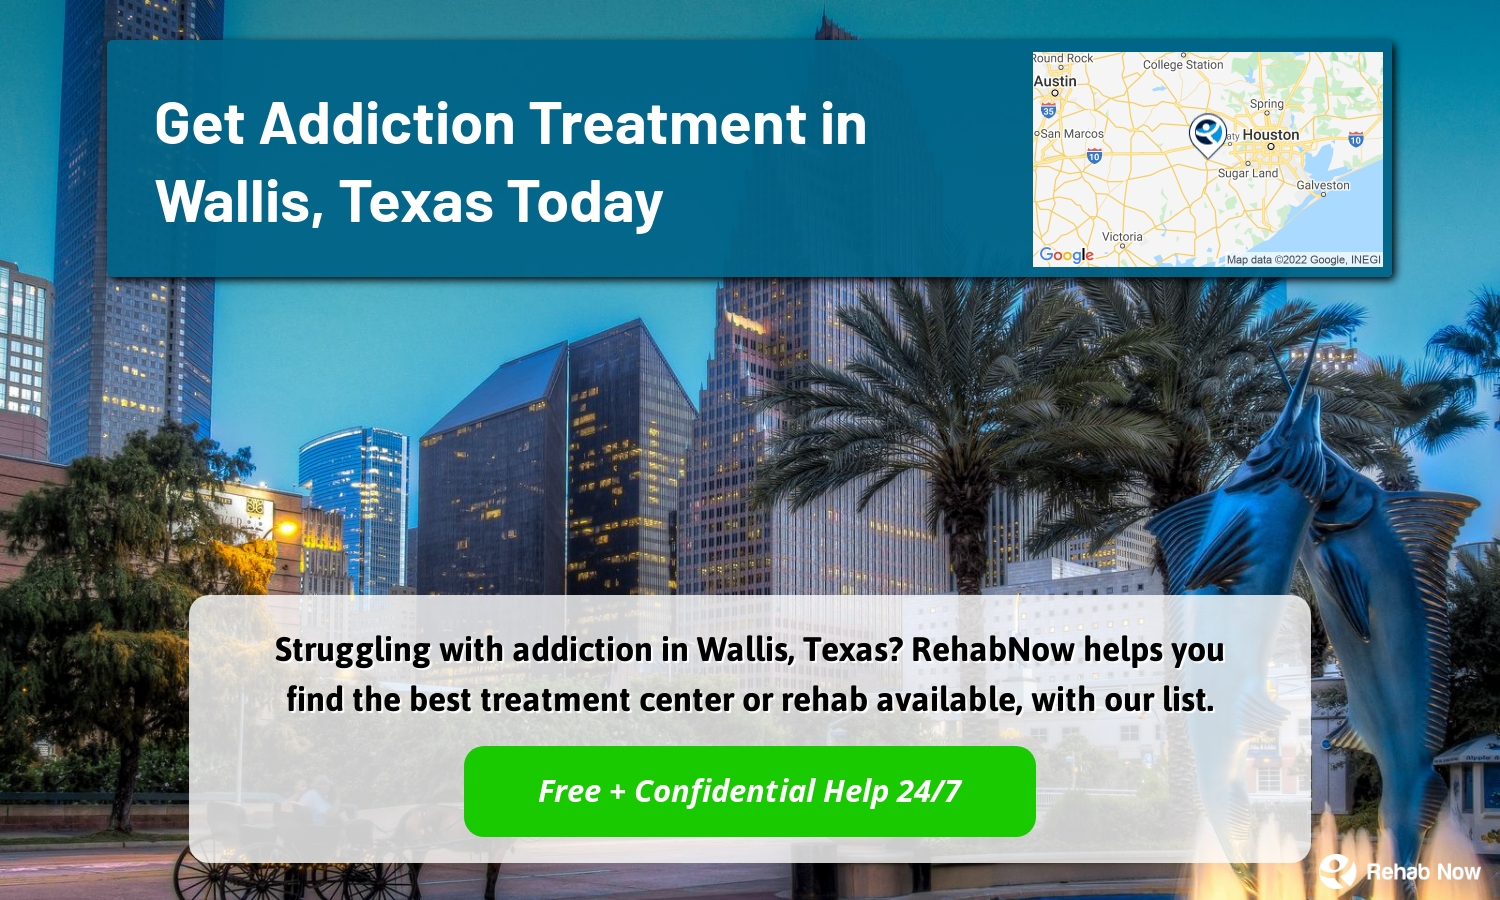 Struggling with addiction in Wallis, Texas? RehabNow helps you find the best treatment center or rehab available, with our list.